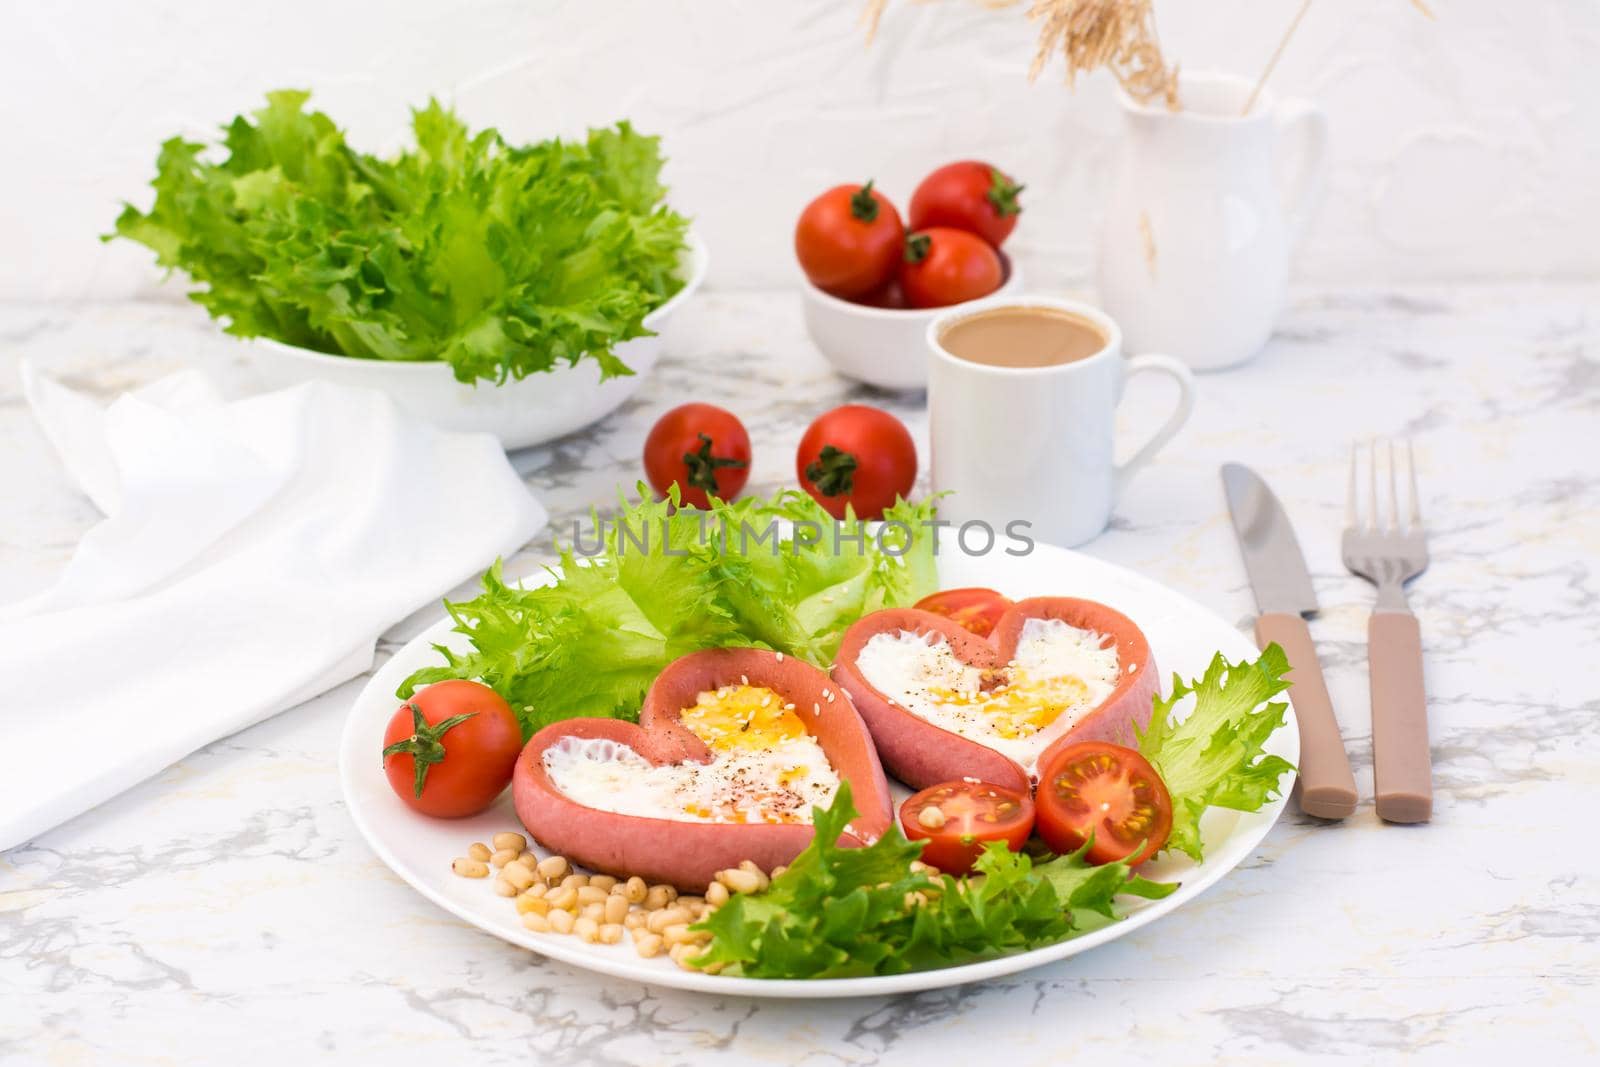 Romantic breakfast. Fried eggs in heart shaped sausages, lettuce and cherry tomatoes on a plate on the table